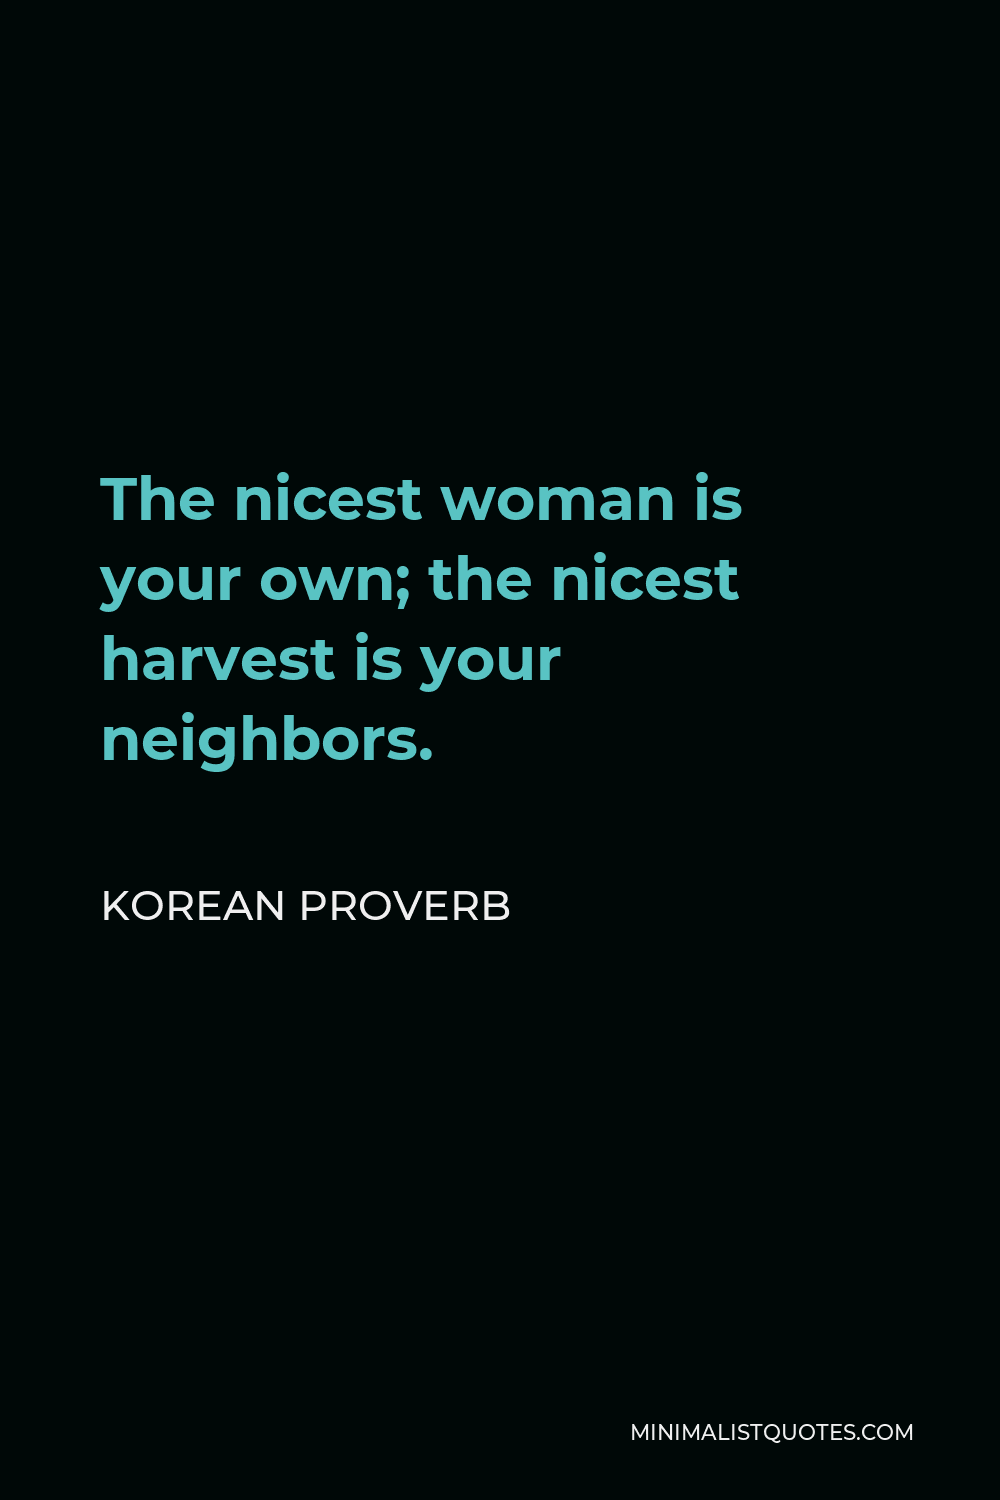 Korean Proverb Quote - The nicest woman is your own; the nicest harvest is your neighbors.